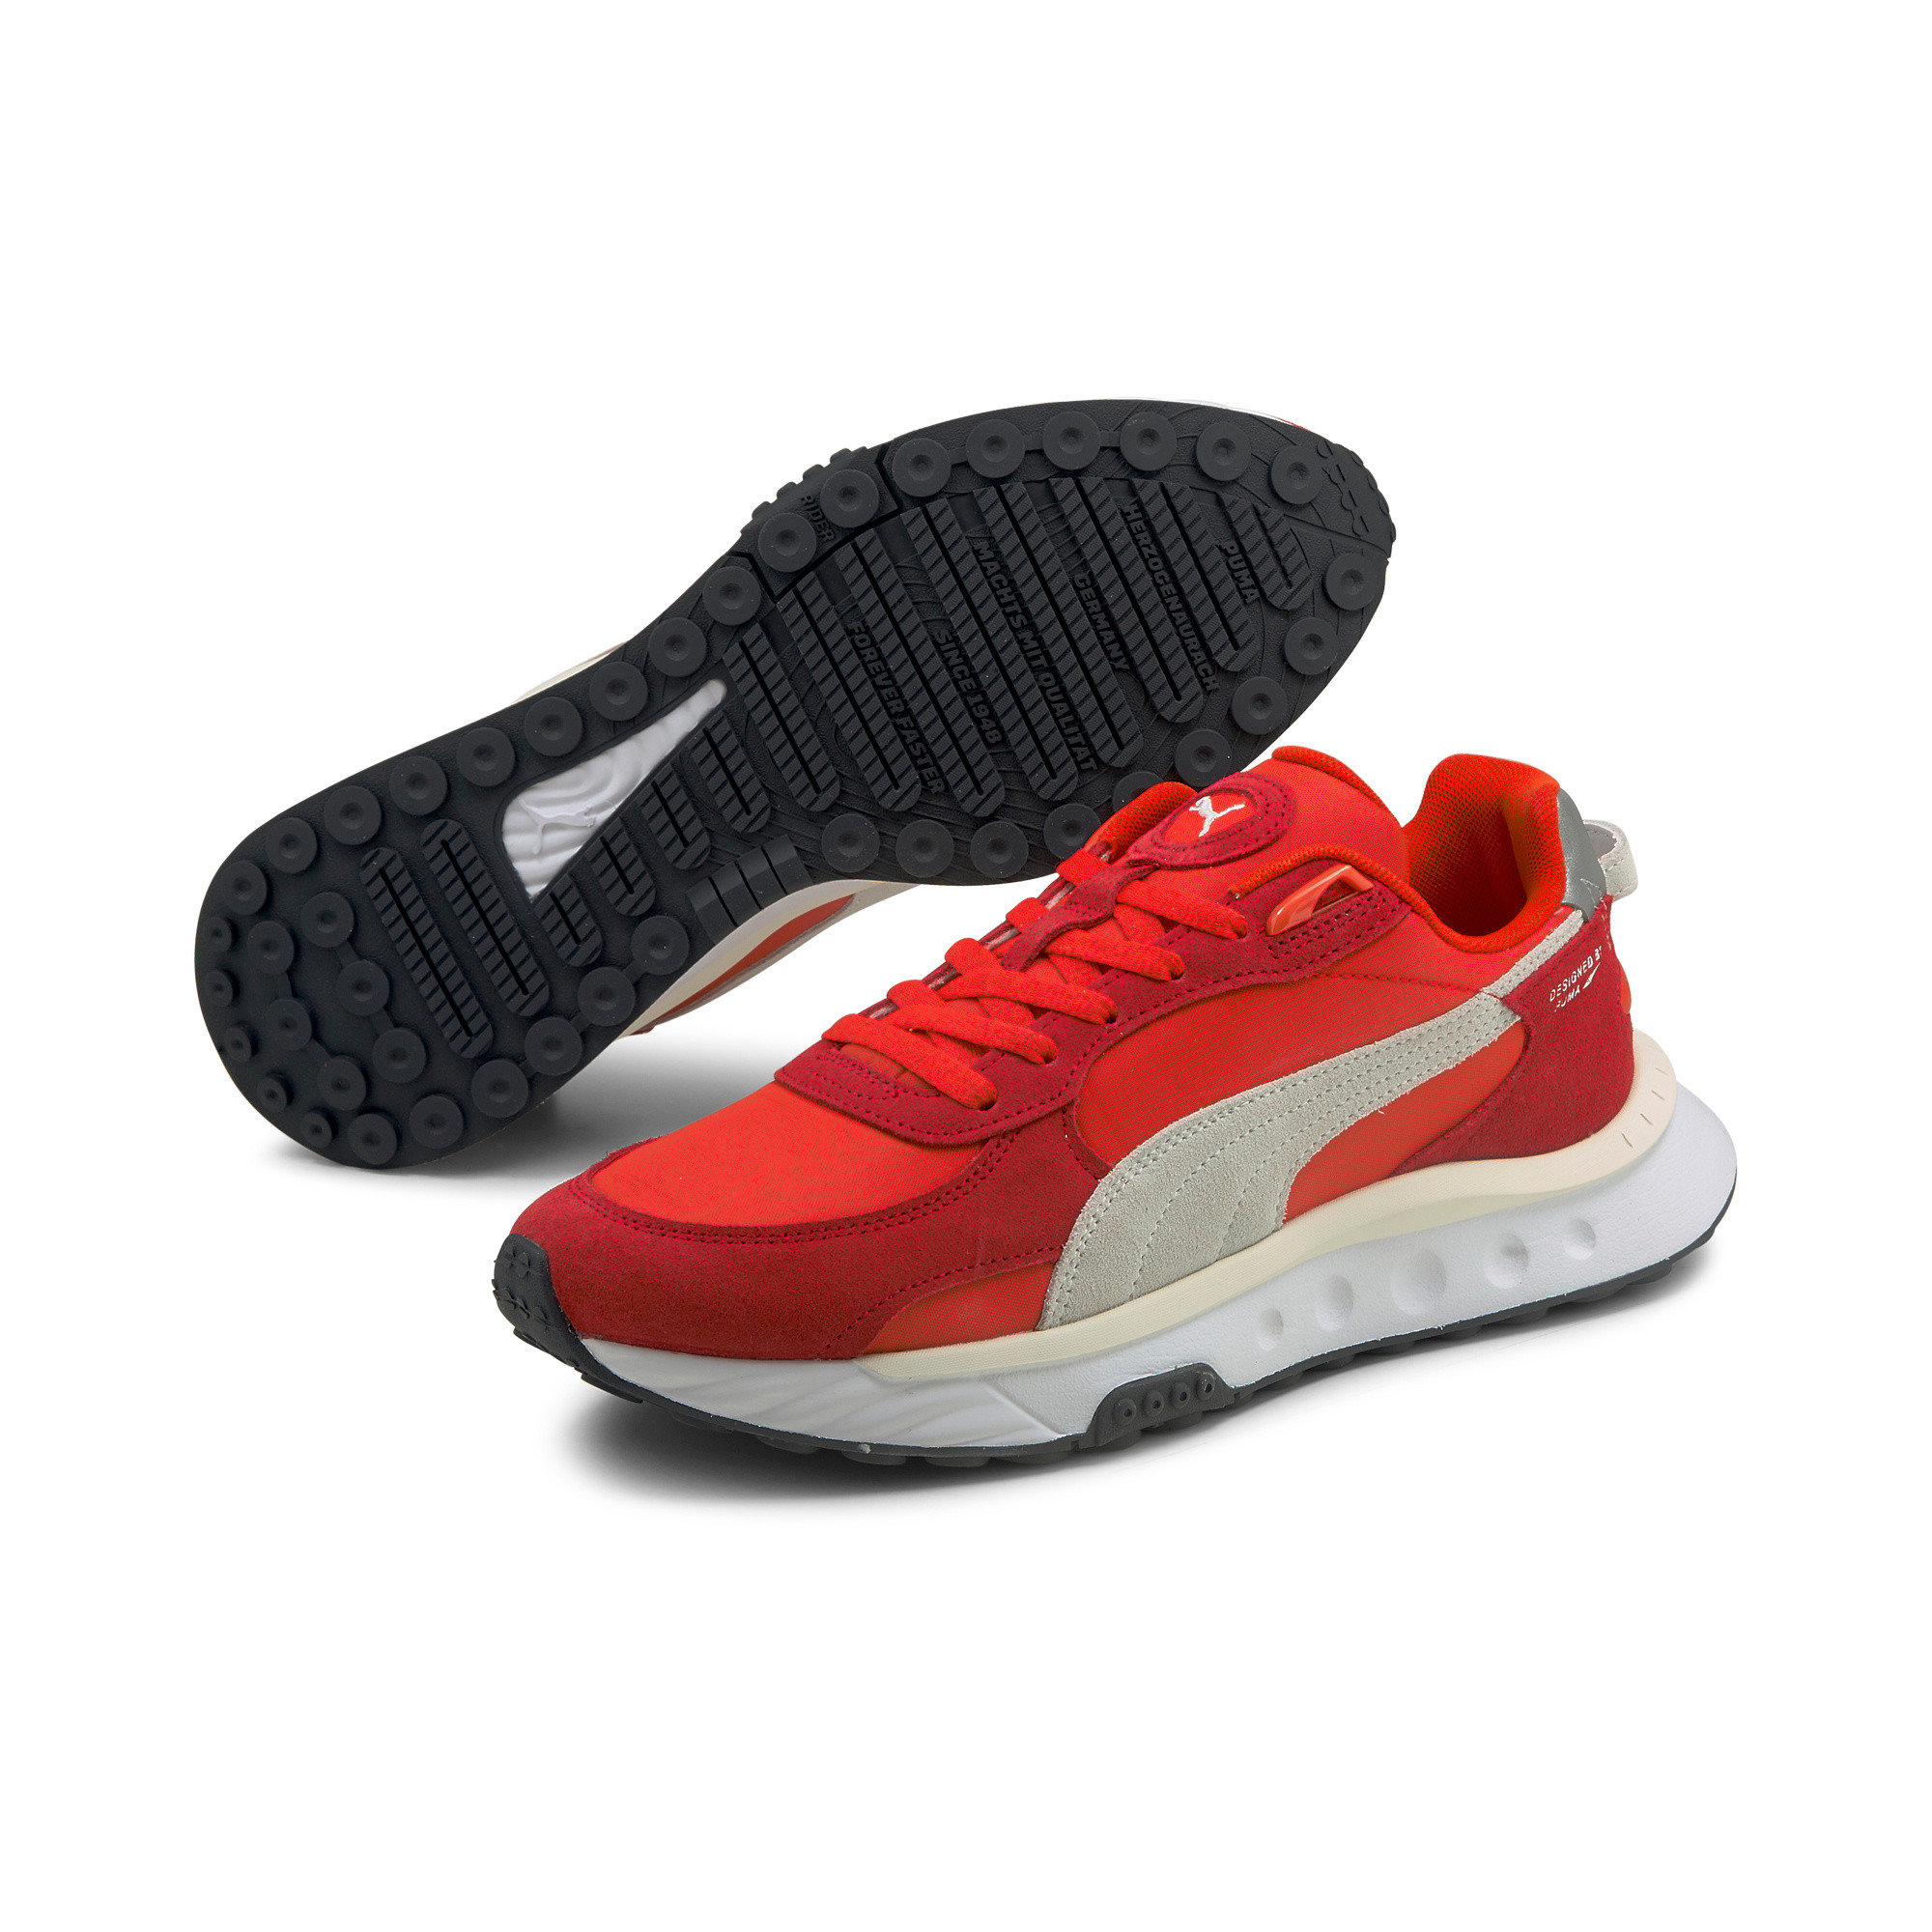 Sneakers PUMA, Rosso, large image number 2